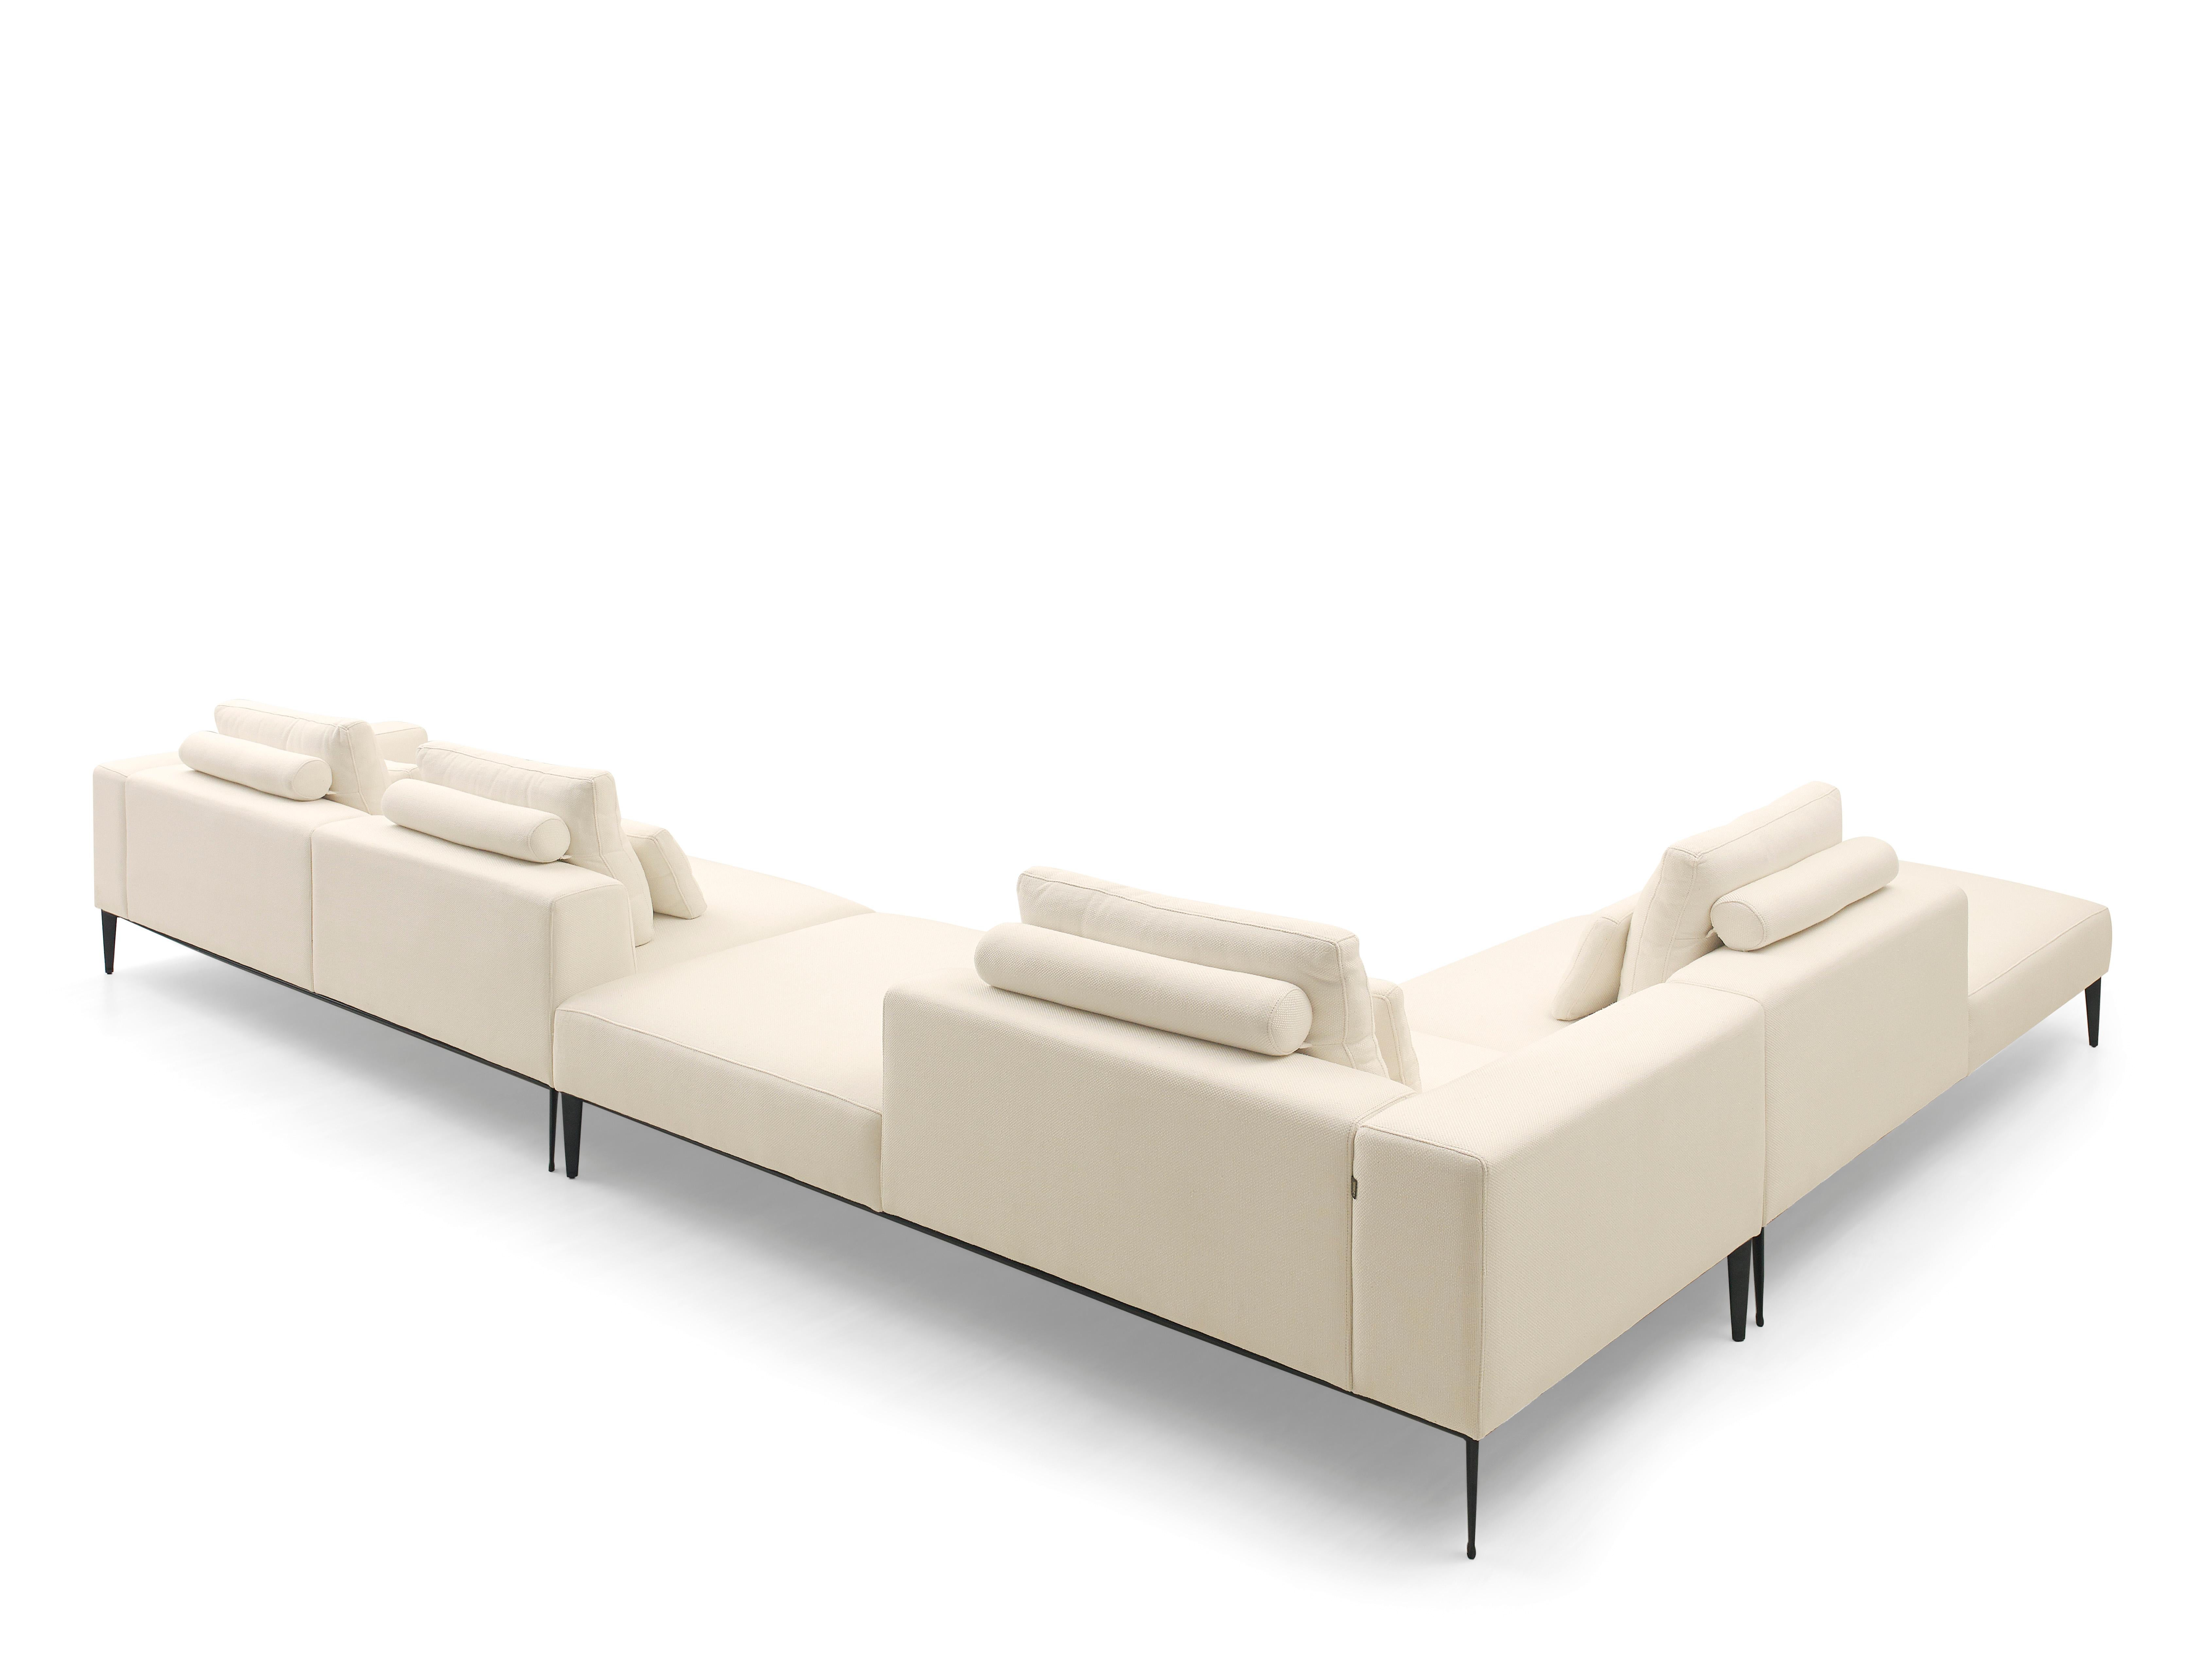 Highly comfortable, this sectional sofa is versatile. Trinity’s can be composed of chaise and puff, items that bring even more comfort to the living room. With contemporary style and feet that do not go unnoticed, the blend has an incomparable